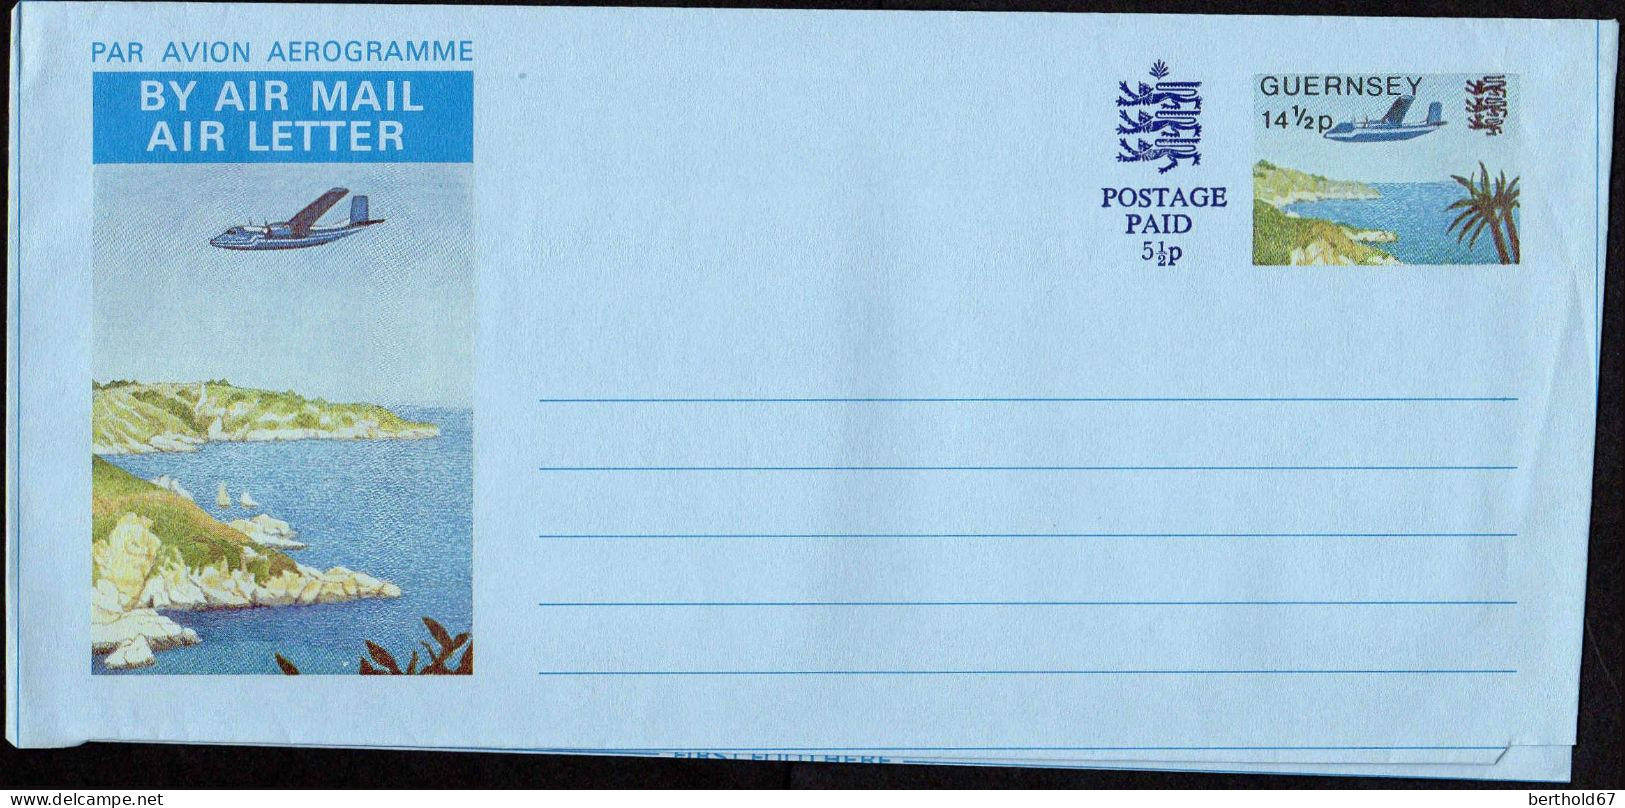 Guernesey Aérogr N** (105) Aerogramme Avion Sur Cote 14½p Postage Paid 5p½ - Guernsey